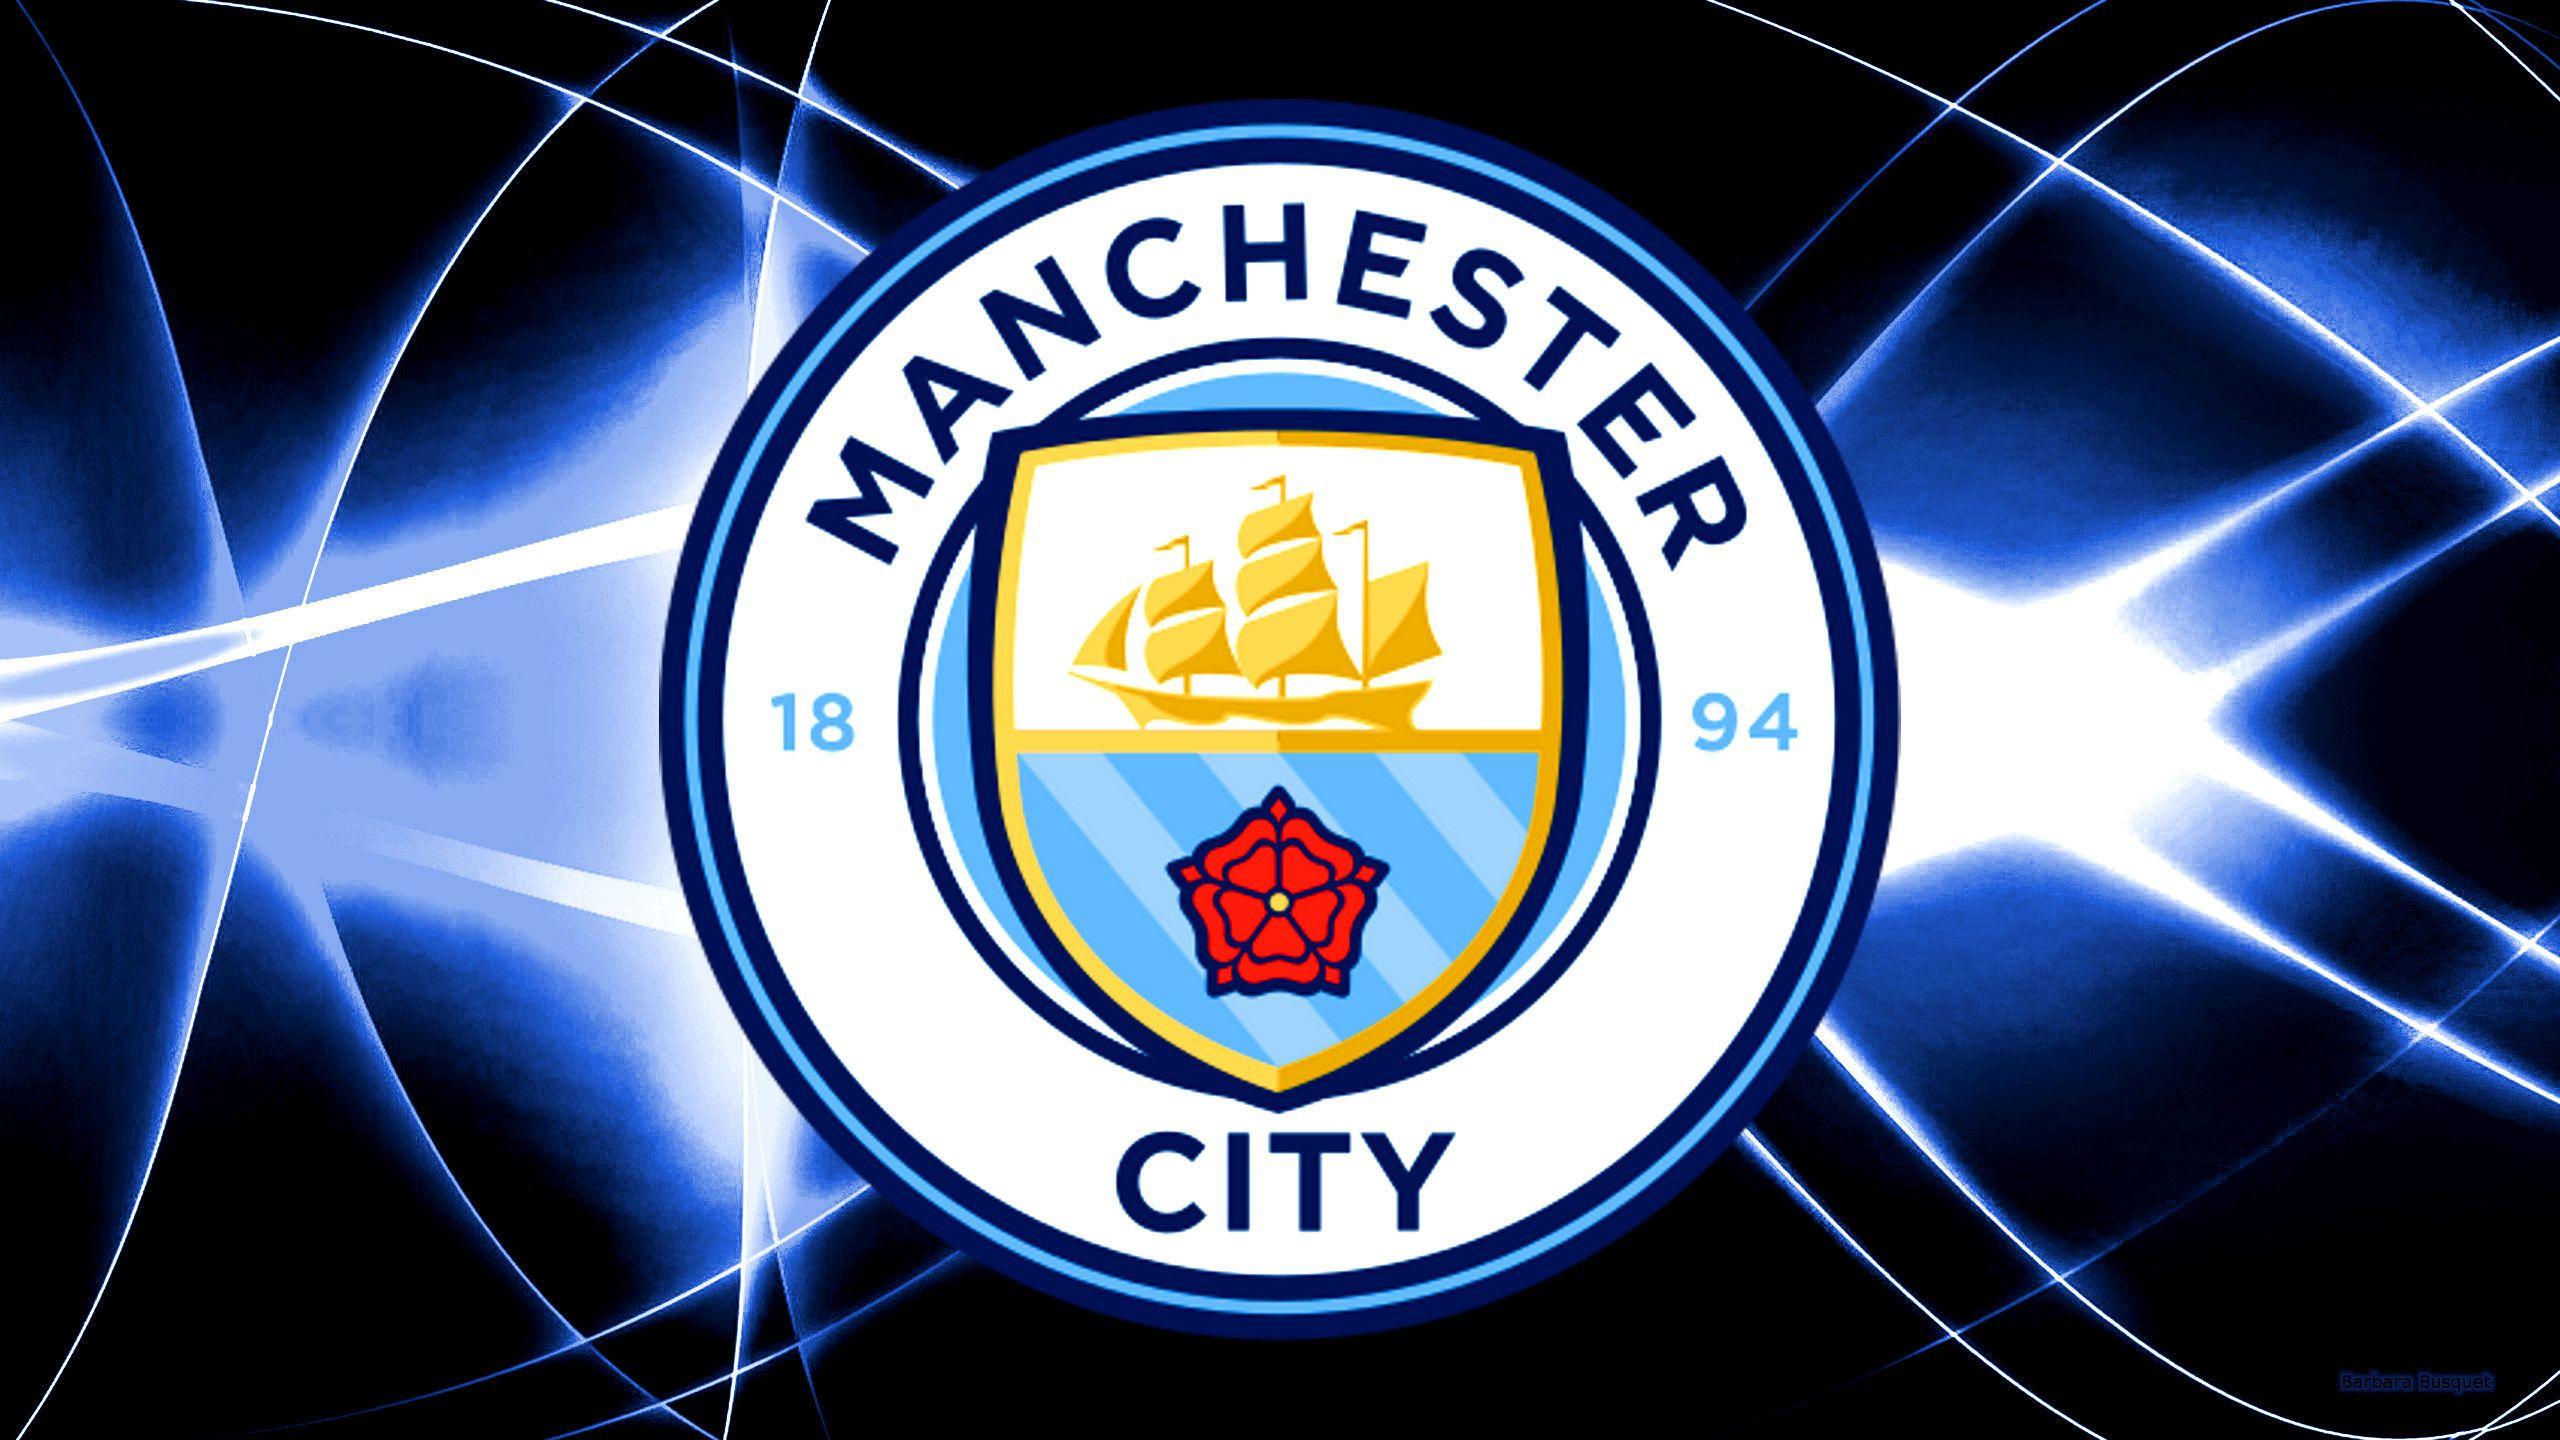 Manchester City 2017 Wallpapers - Wallpaper Cave